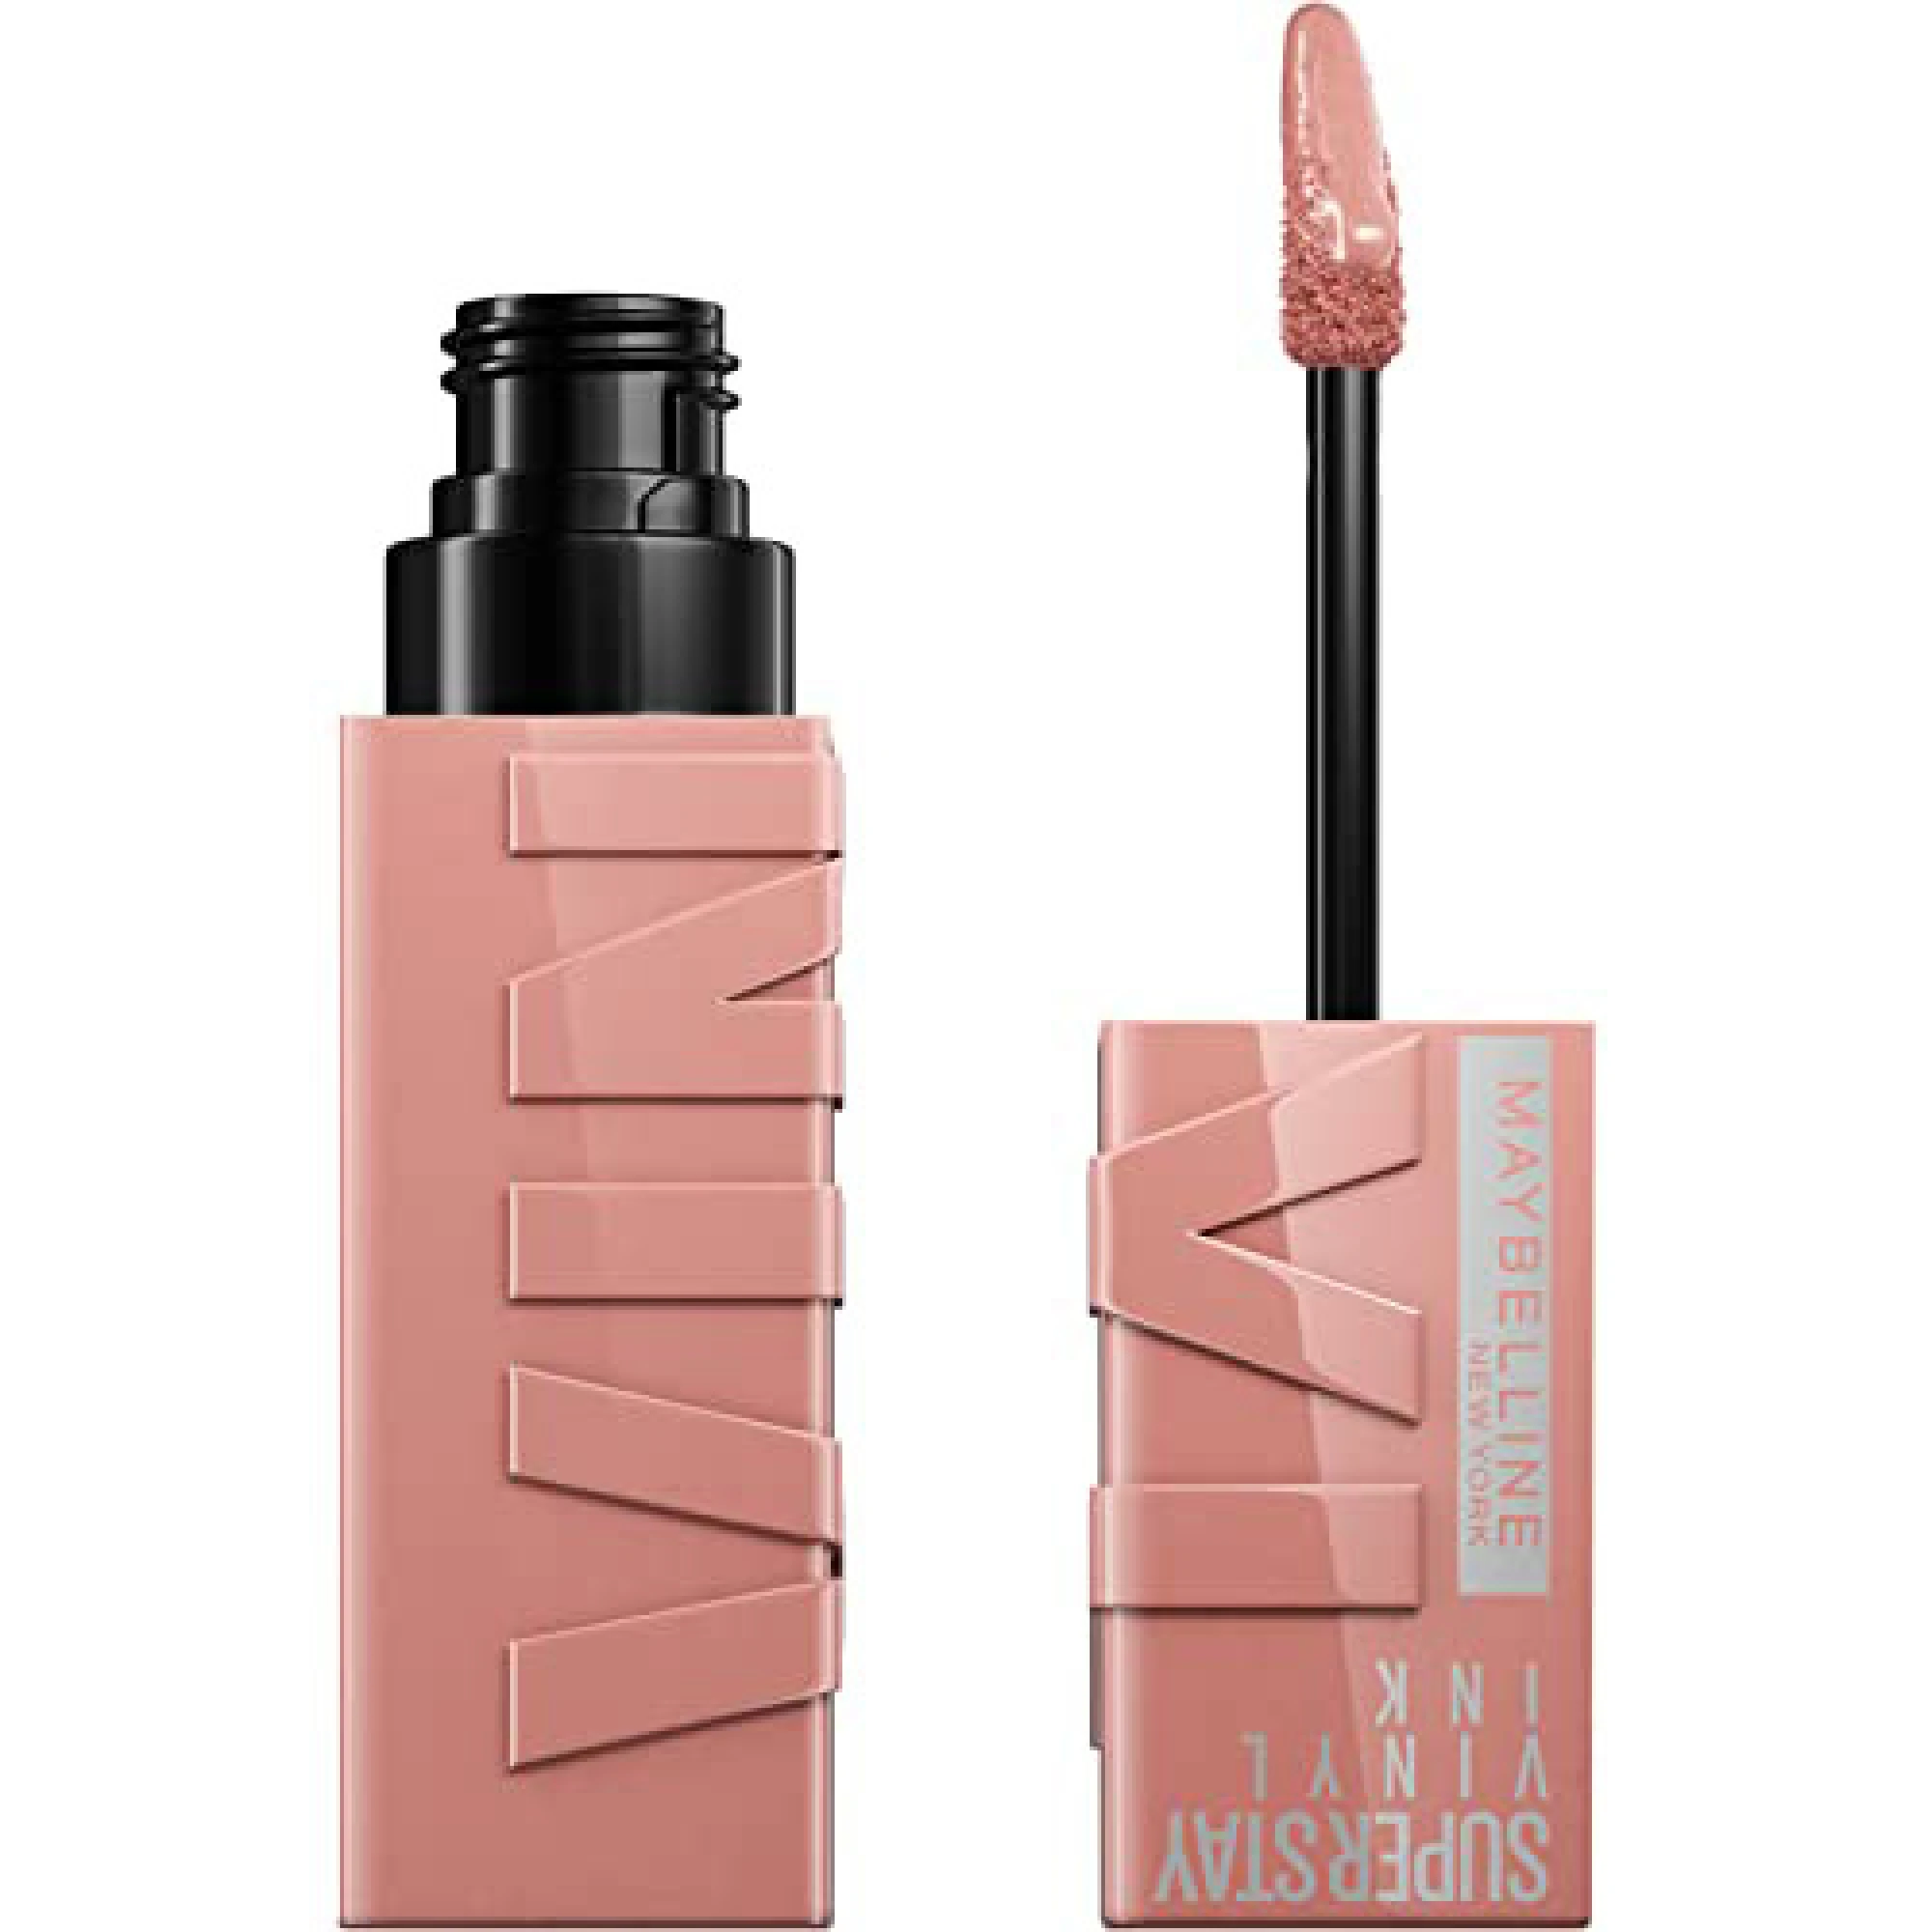 MAYB VINYL NUDE SHOCK CAPTIVATED n/a 